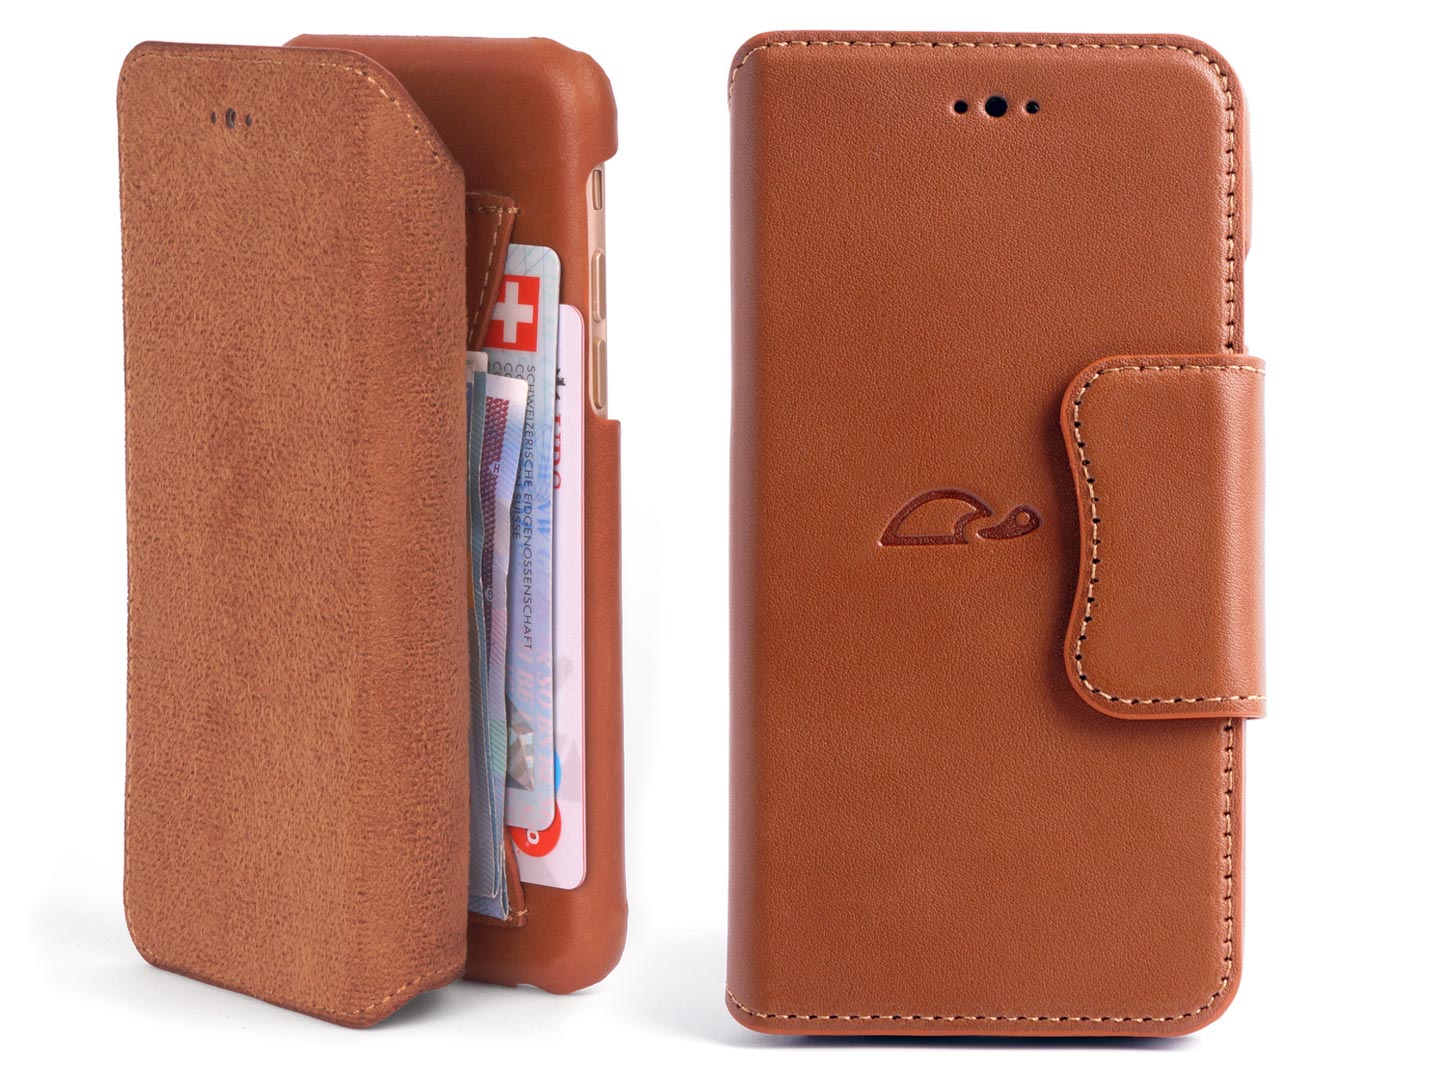 Wallet case iPhone 6 - leather - tan - cards - cash - Carapaz